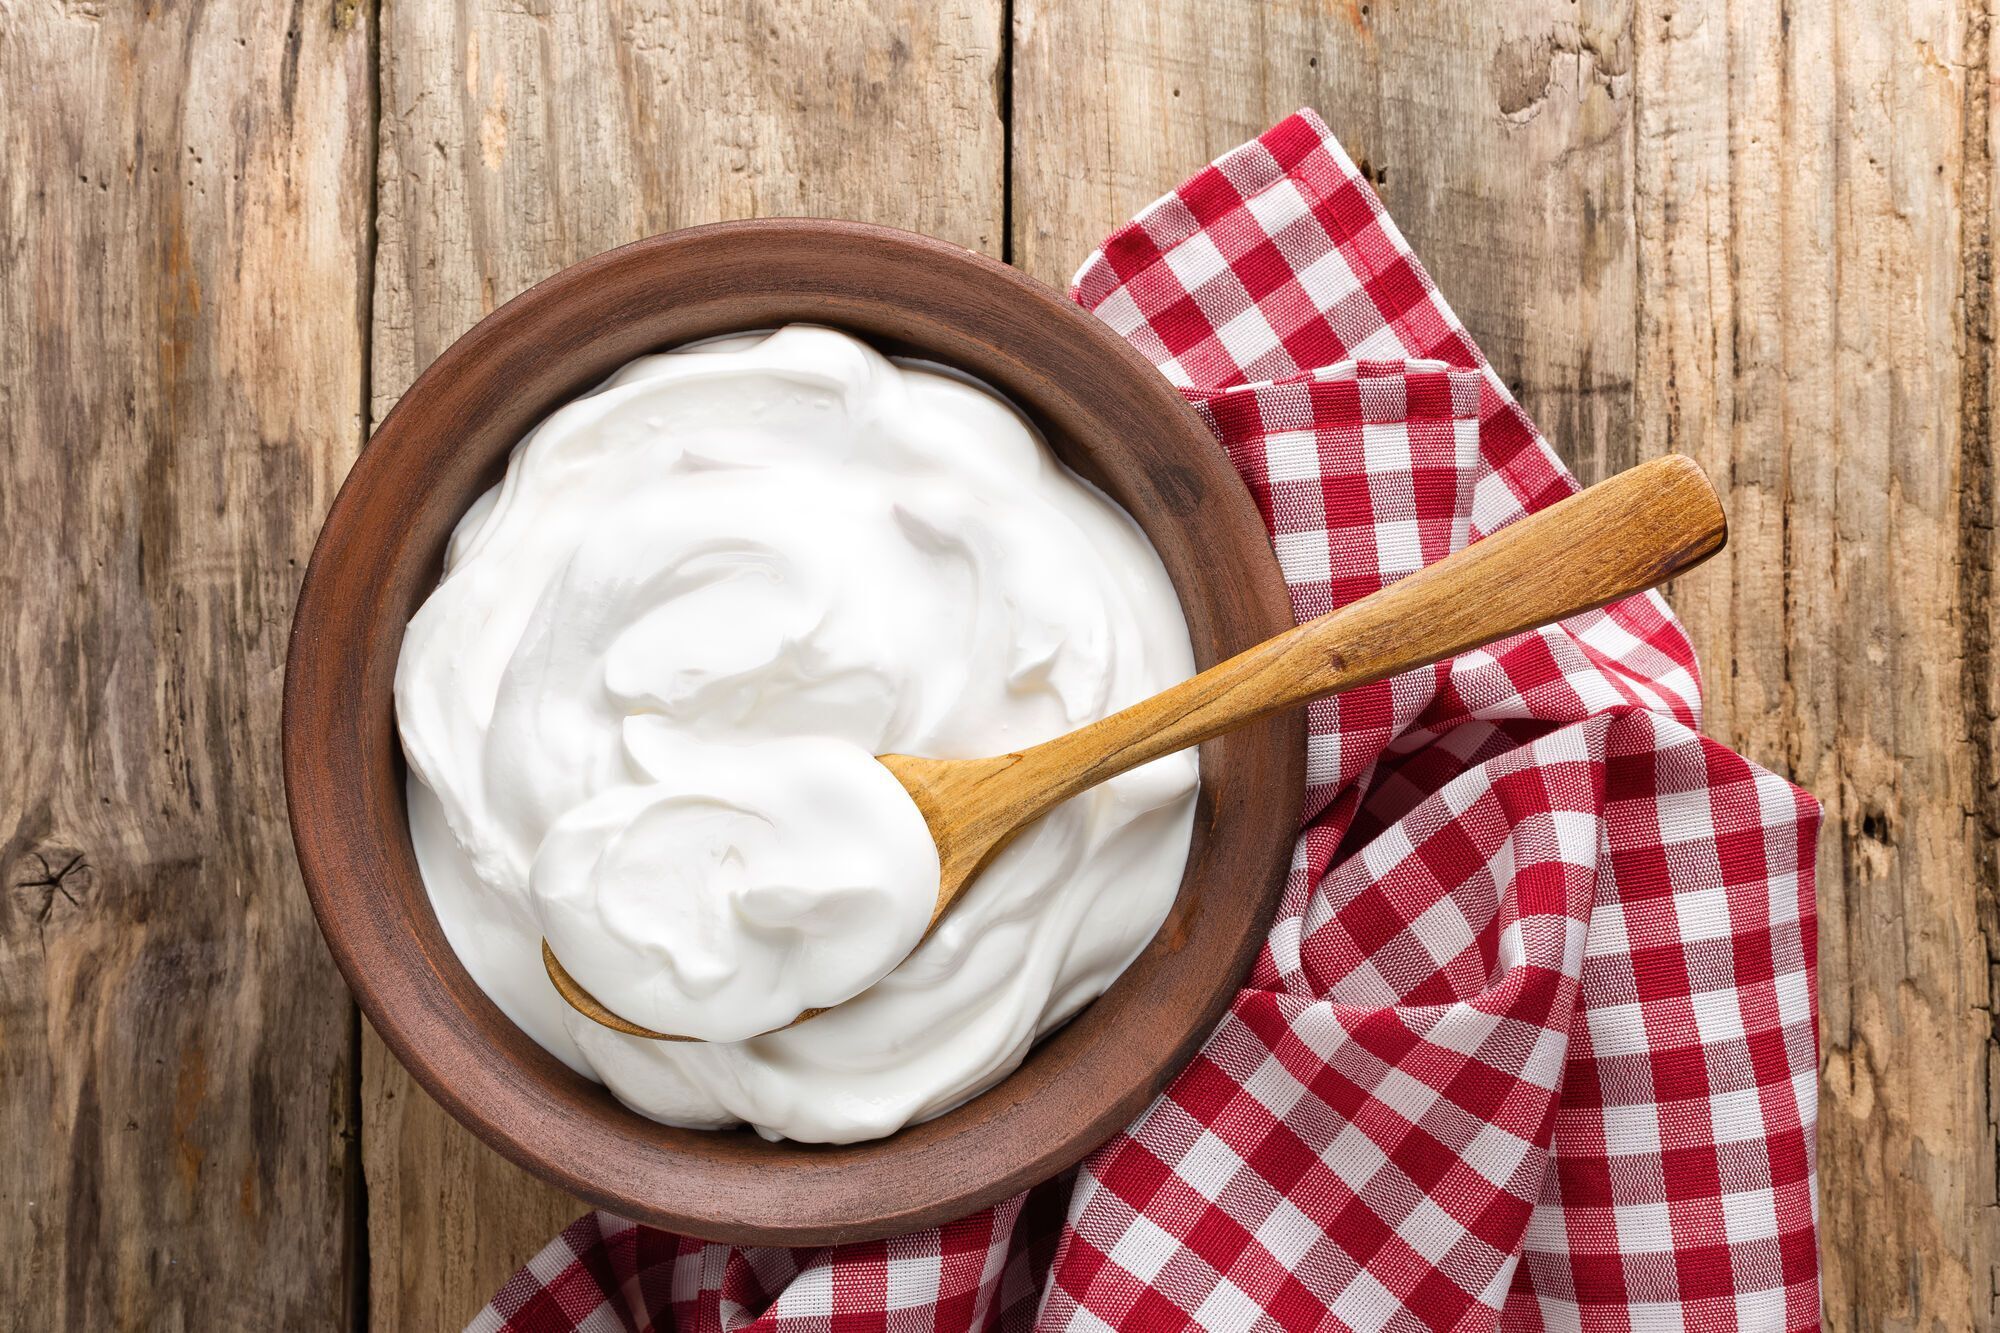 How to choose high-quality and natural sour cream